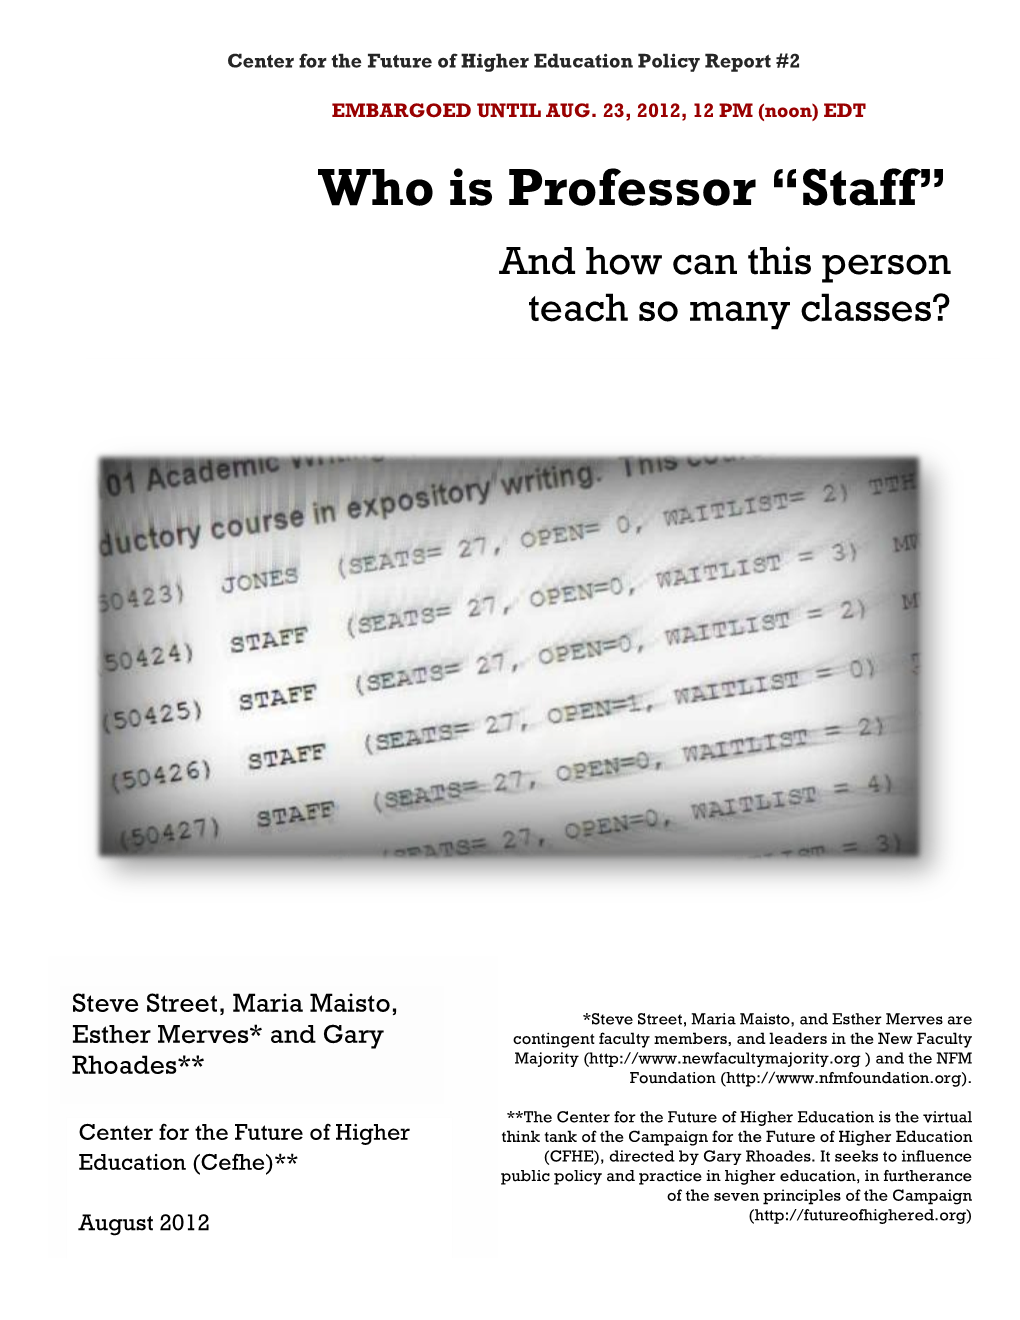 Who Is Professor “Staff” and How Can This Person Teach So Many Classes?